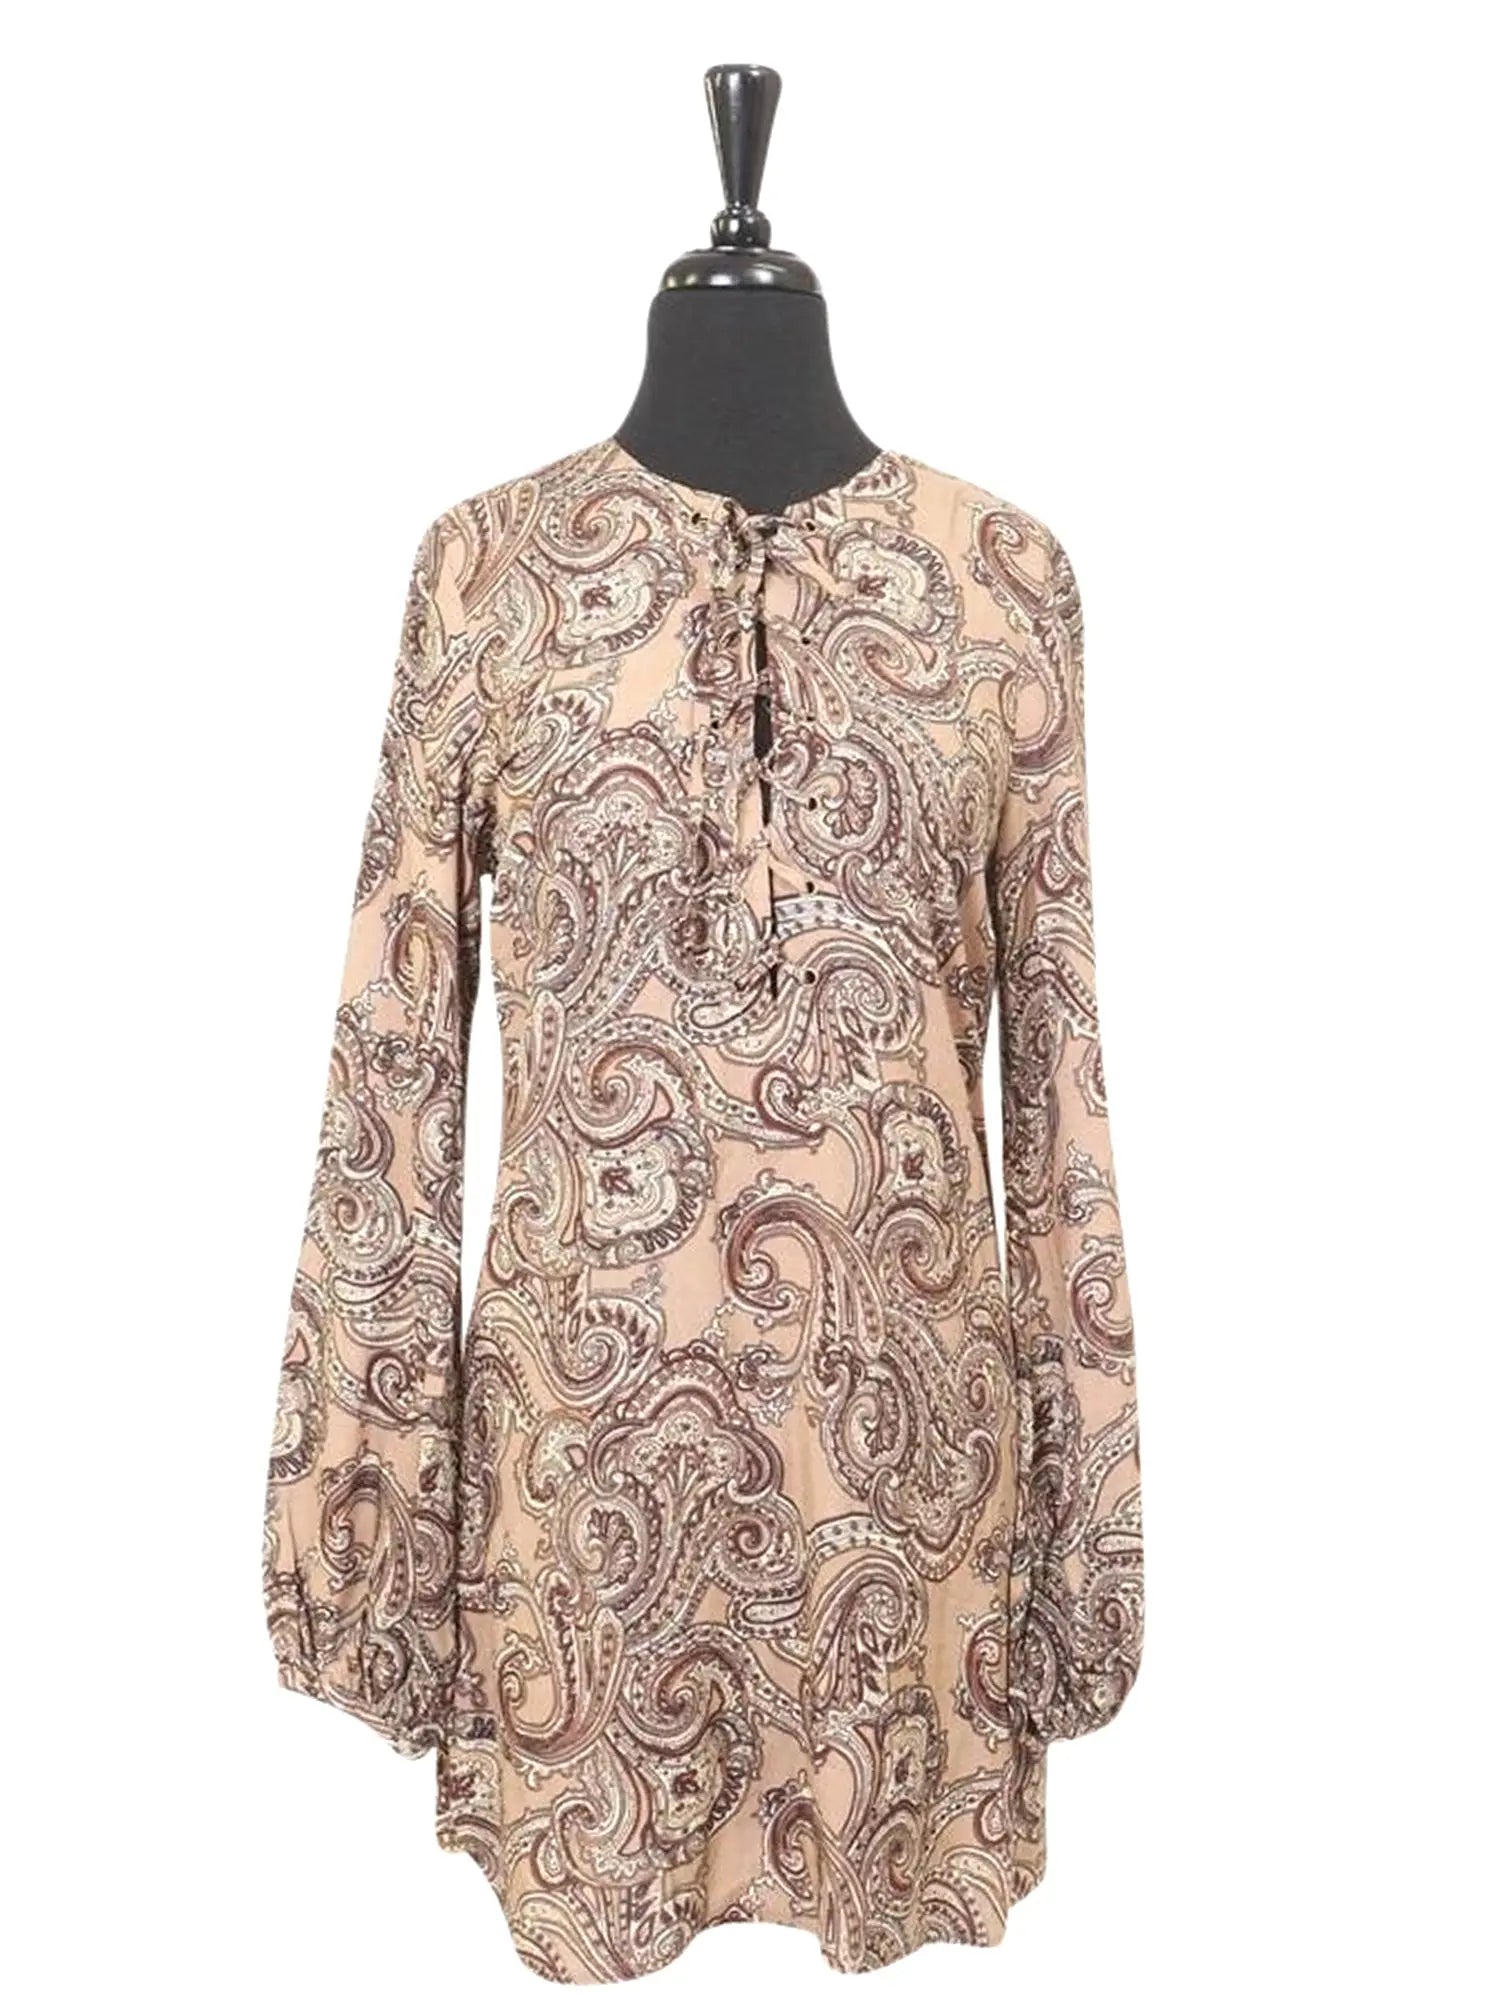 Cotton Candy Paisley Top -   Designers